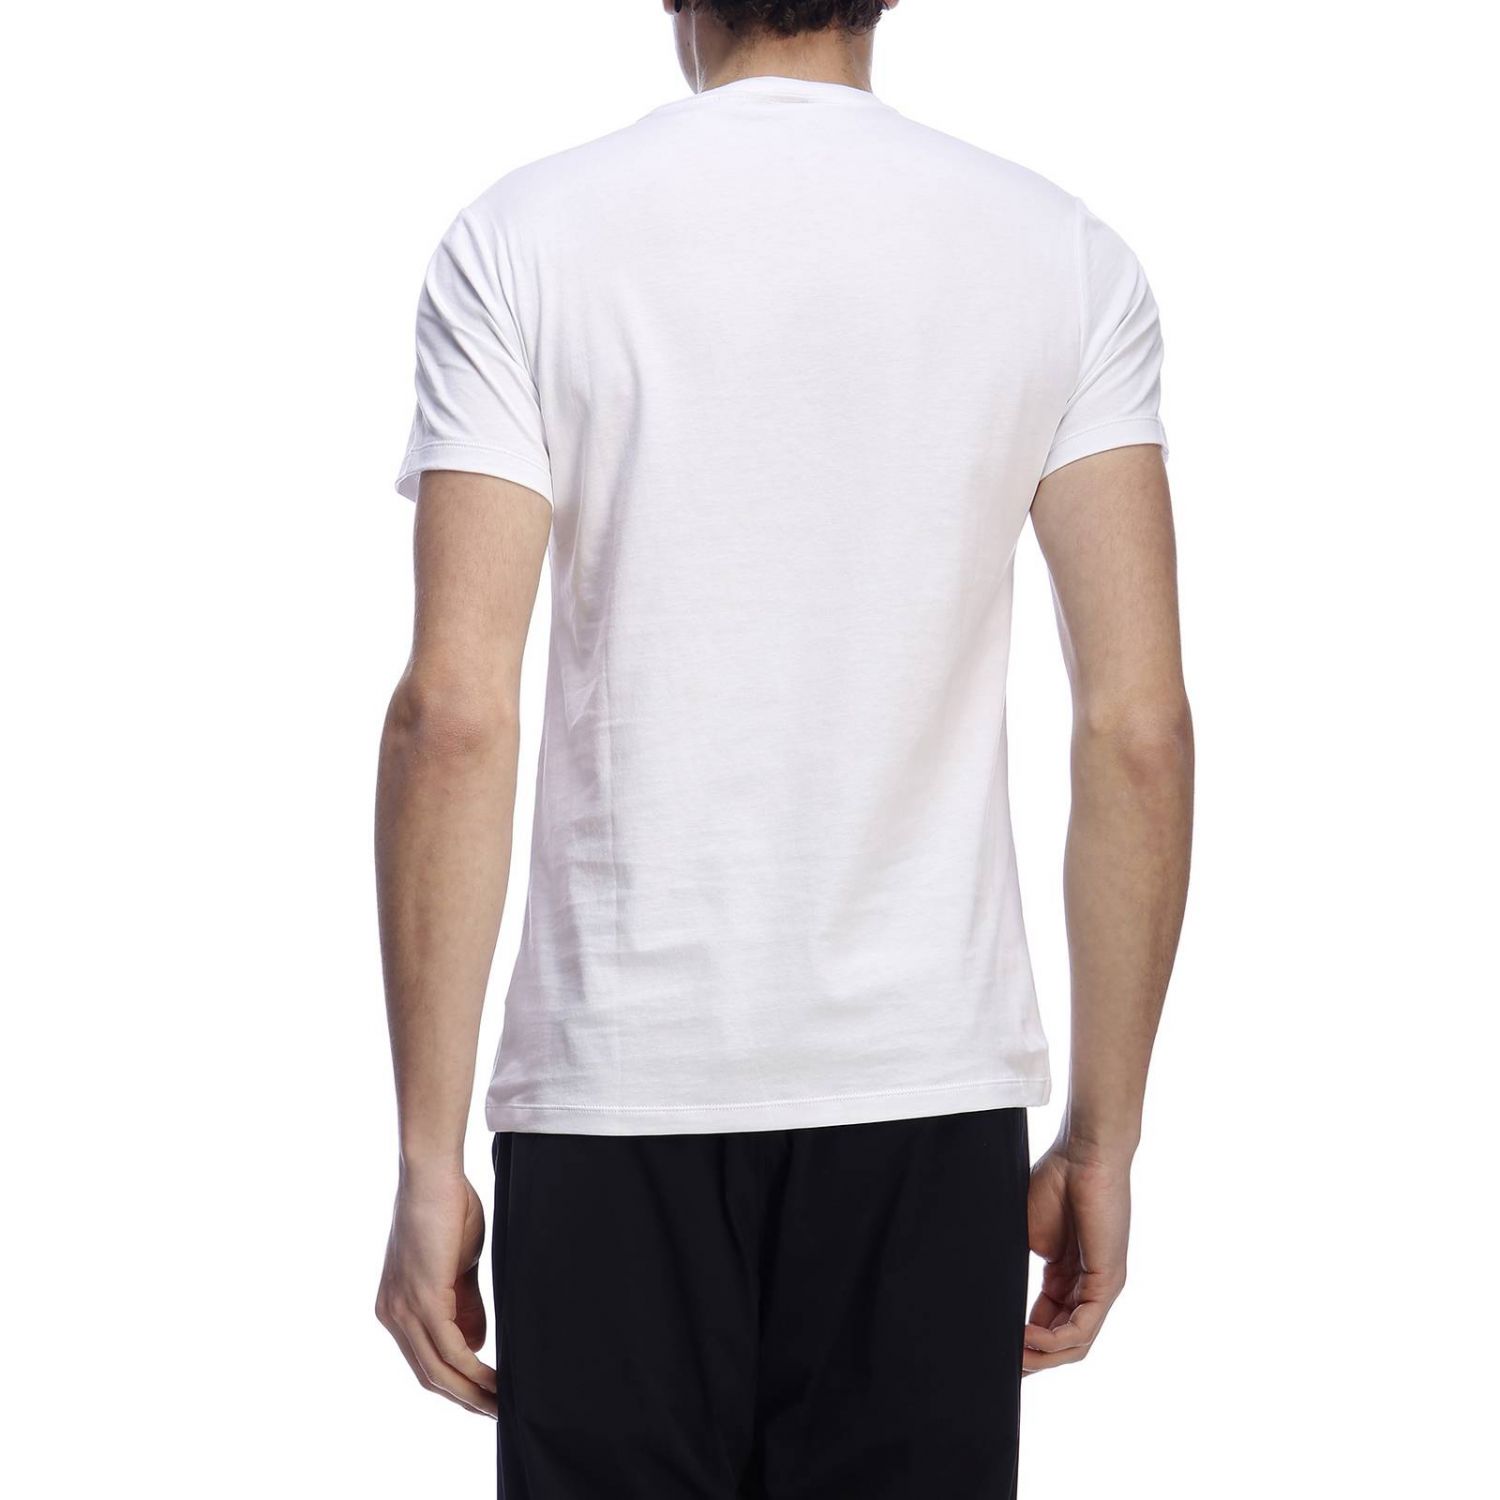 Burberry Outlet: T-shirt men - White | T-Shirt Burberry 8007015 GIGLIO.COM